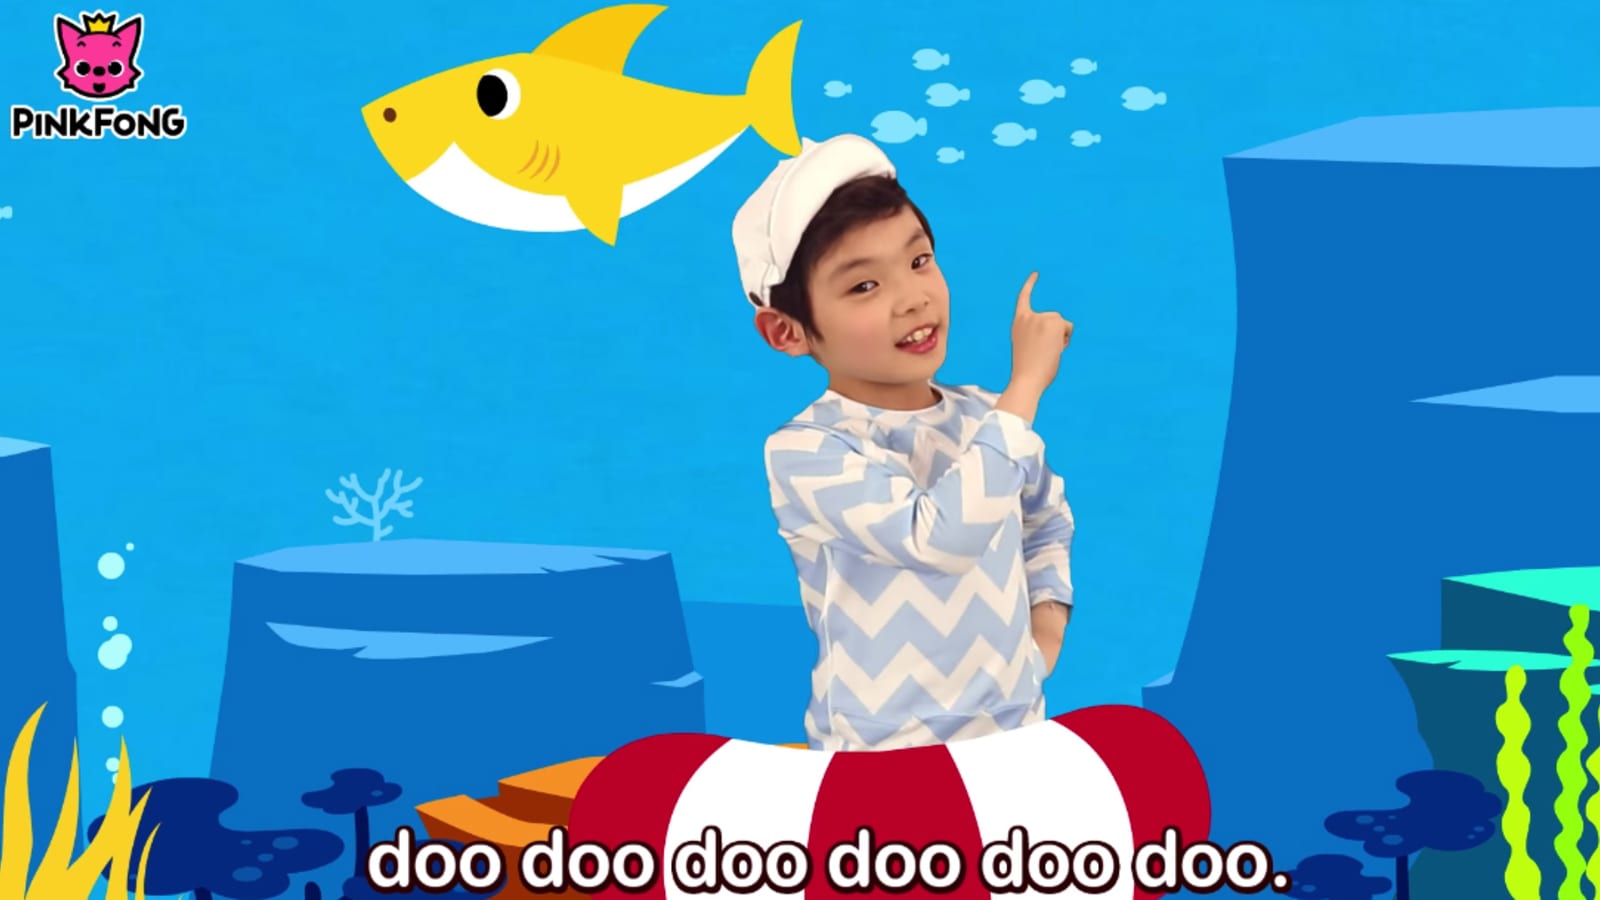 Viral Baby Shark Song To Expand Brand To Tv Concerts And More - dance off robloxbaby shark